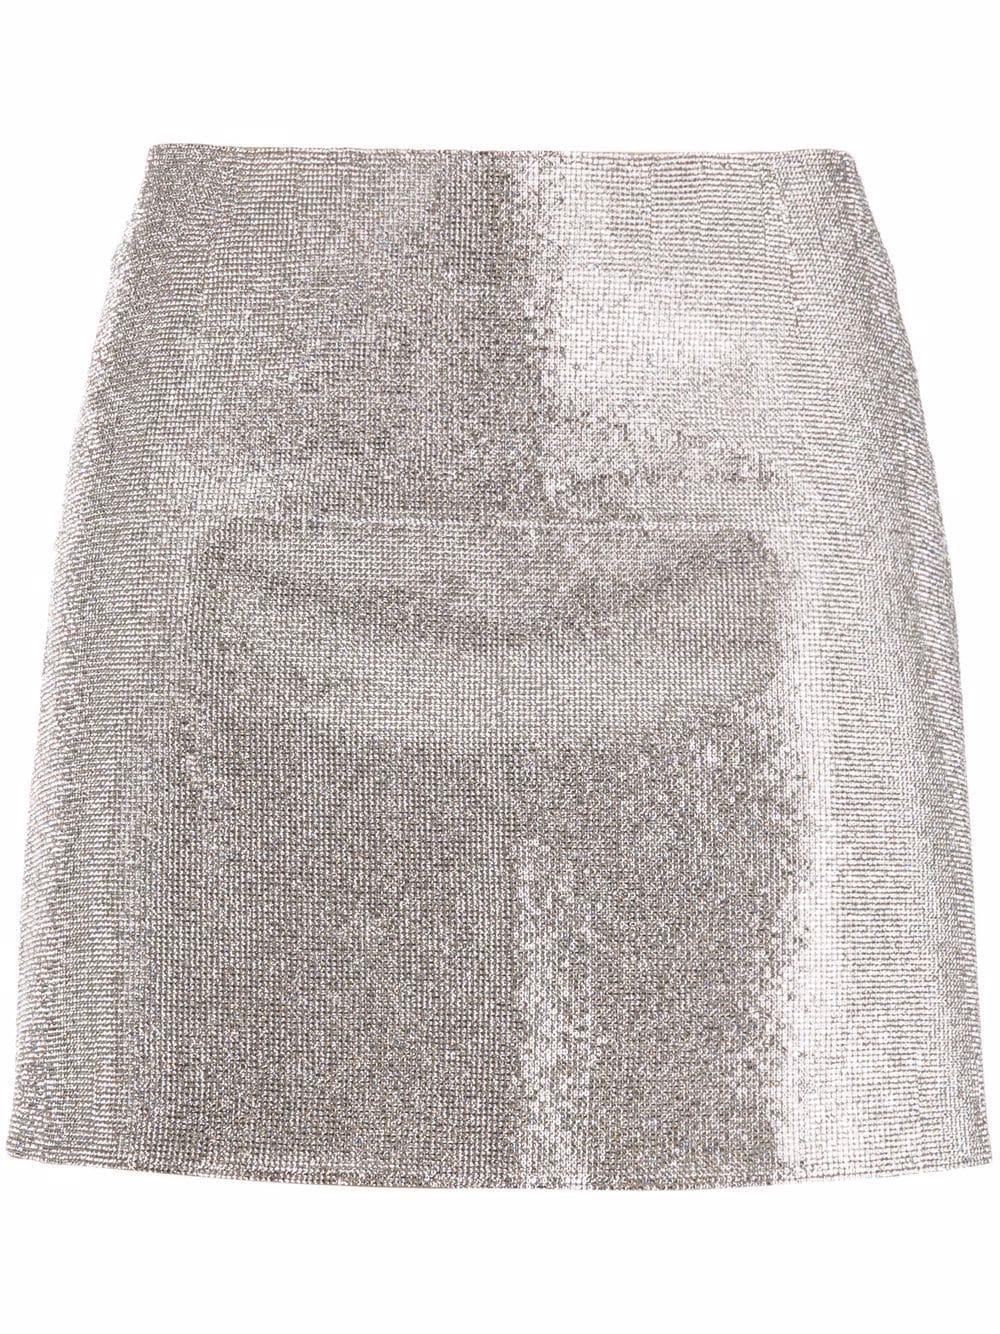 Nue Silk Camille Crystal-embellished Skirt in Silver (Metallic) - Lyst